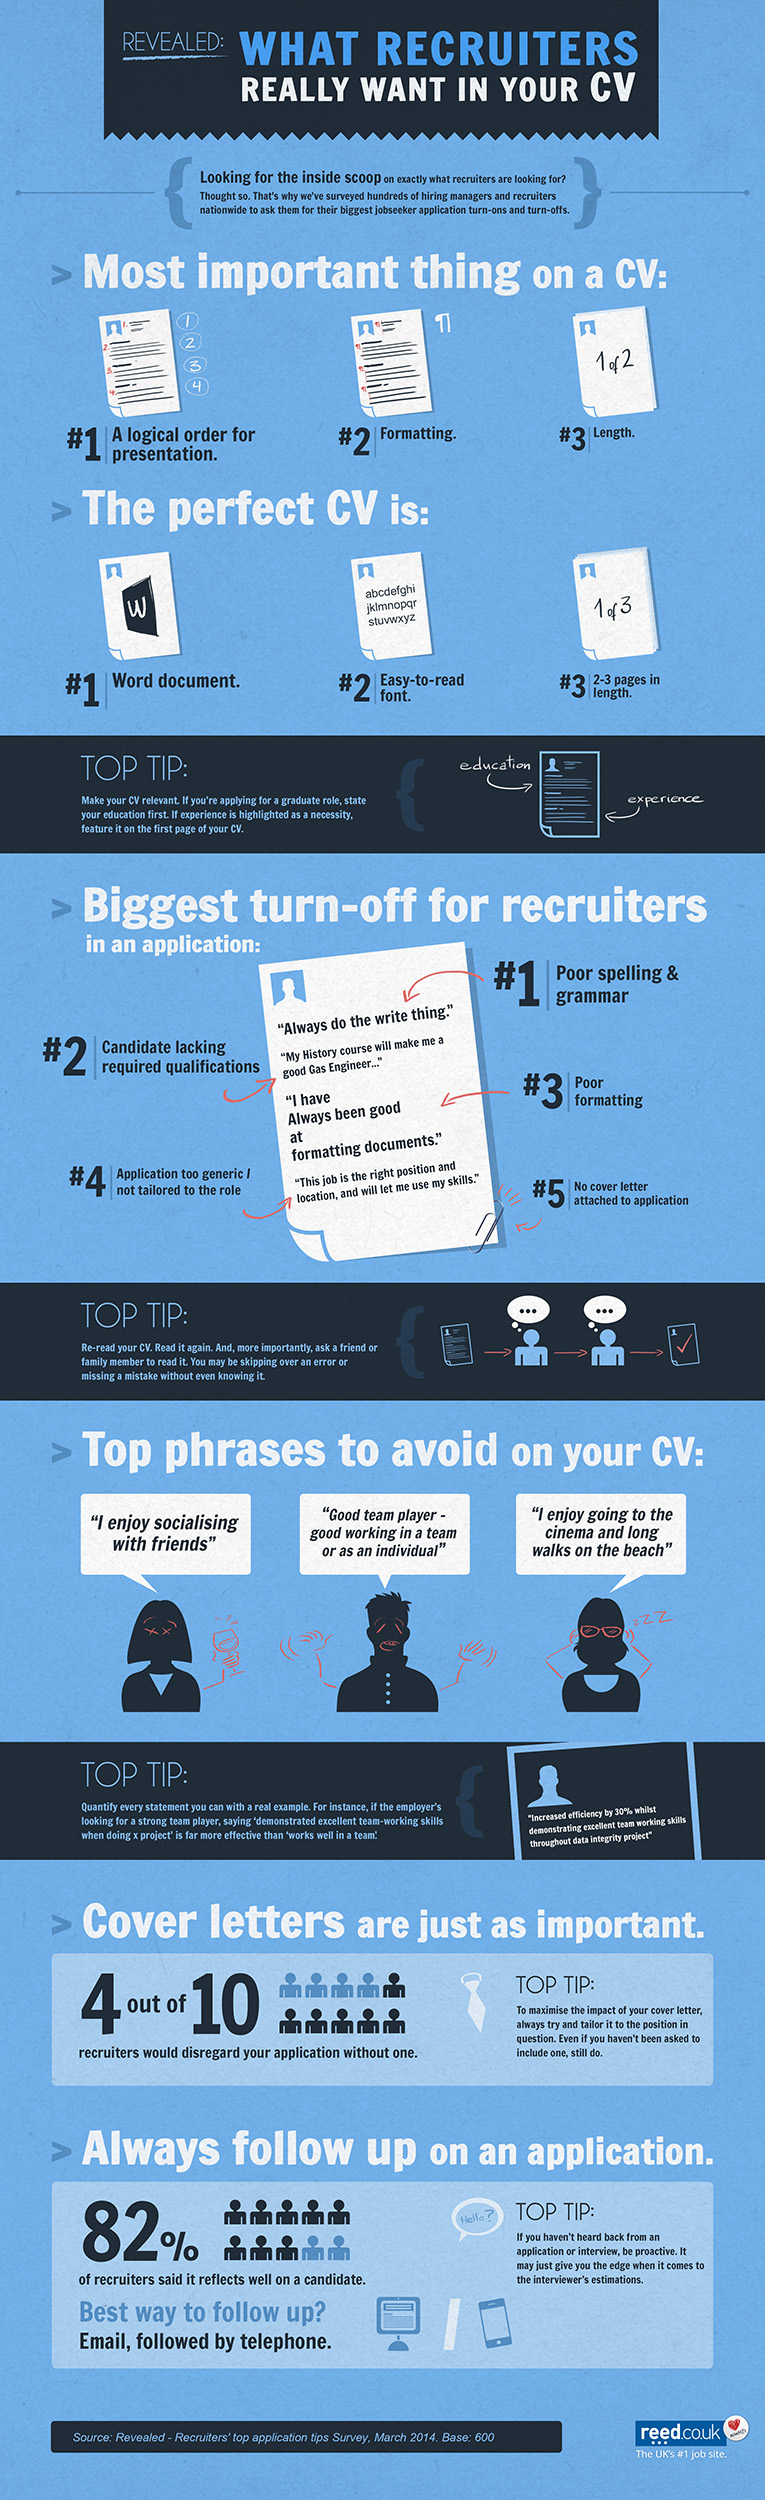 Revealed: What recruiters really want in your CV